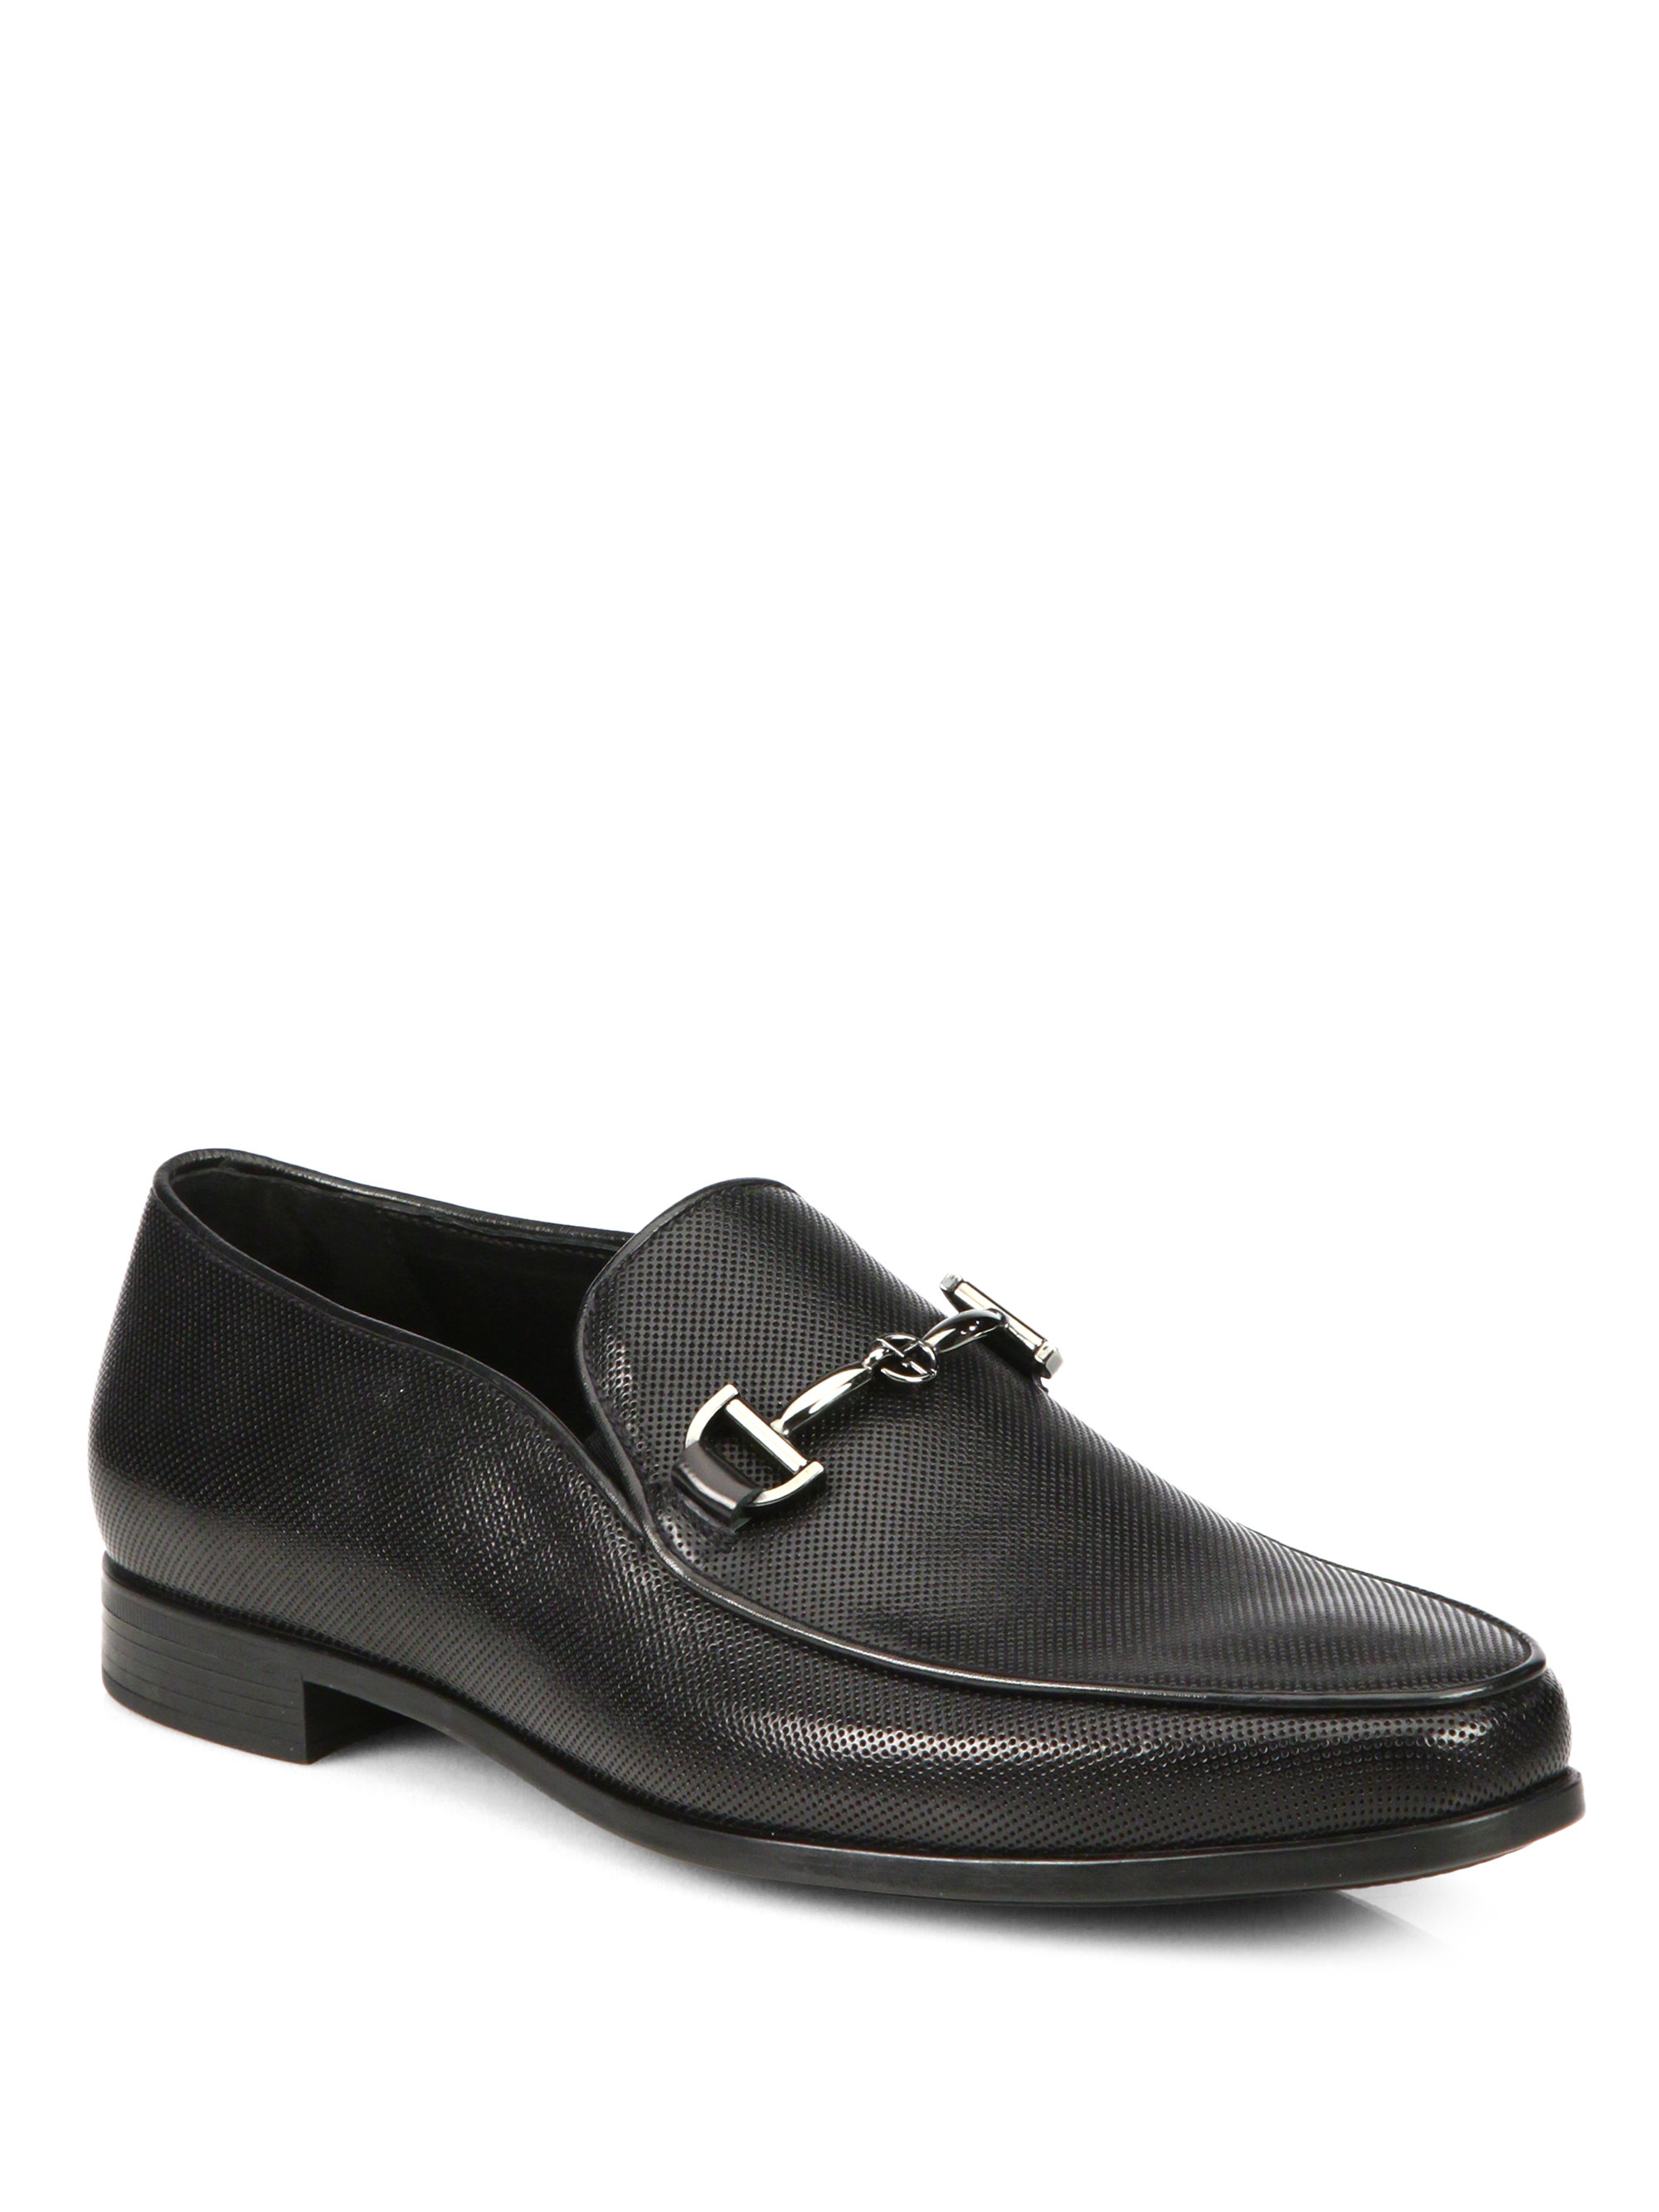 Lyst - Giorgio Armani Textured Leather Loafers in Black for Men